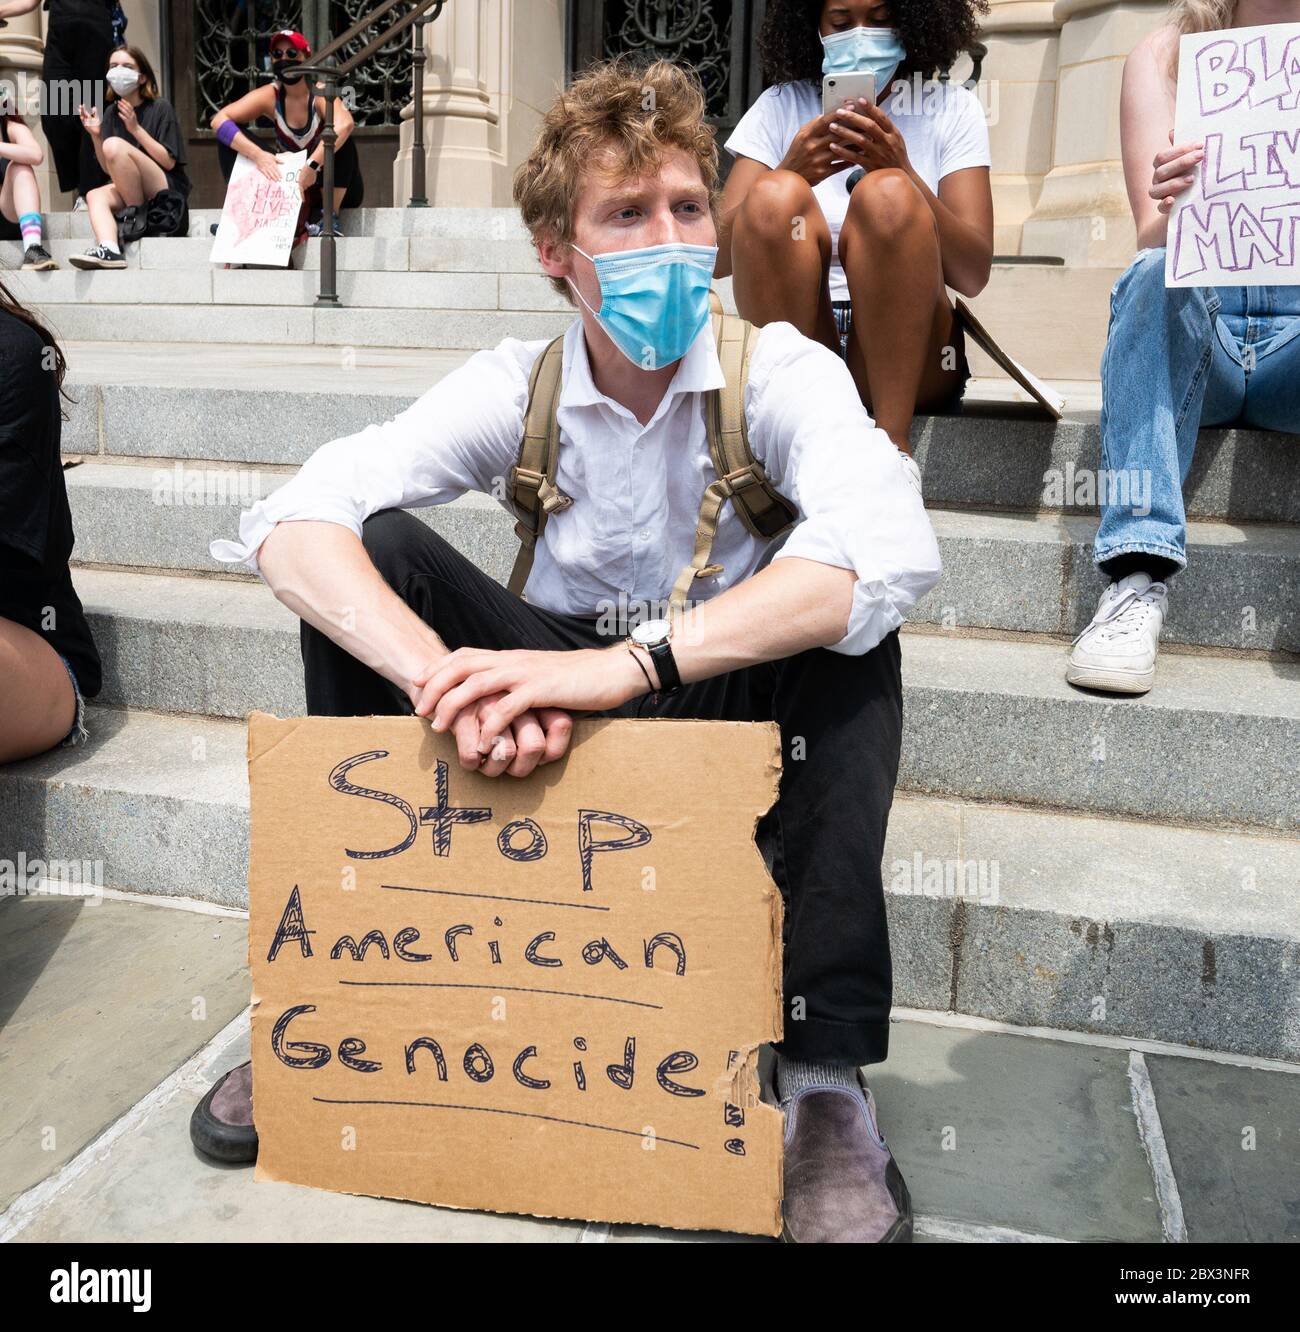 Washington, United States. 04th June, 2020. June 4, 2020 - Washington, DC, United States: Man with 'Stop American Genocide!' sign at a protest supporting Black Lives Matter at the National Cathedral. (Photo by Michael Brochstein/Sipa USA) Credit: Sipa USA/Alamy Live News Stock Photo